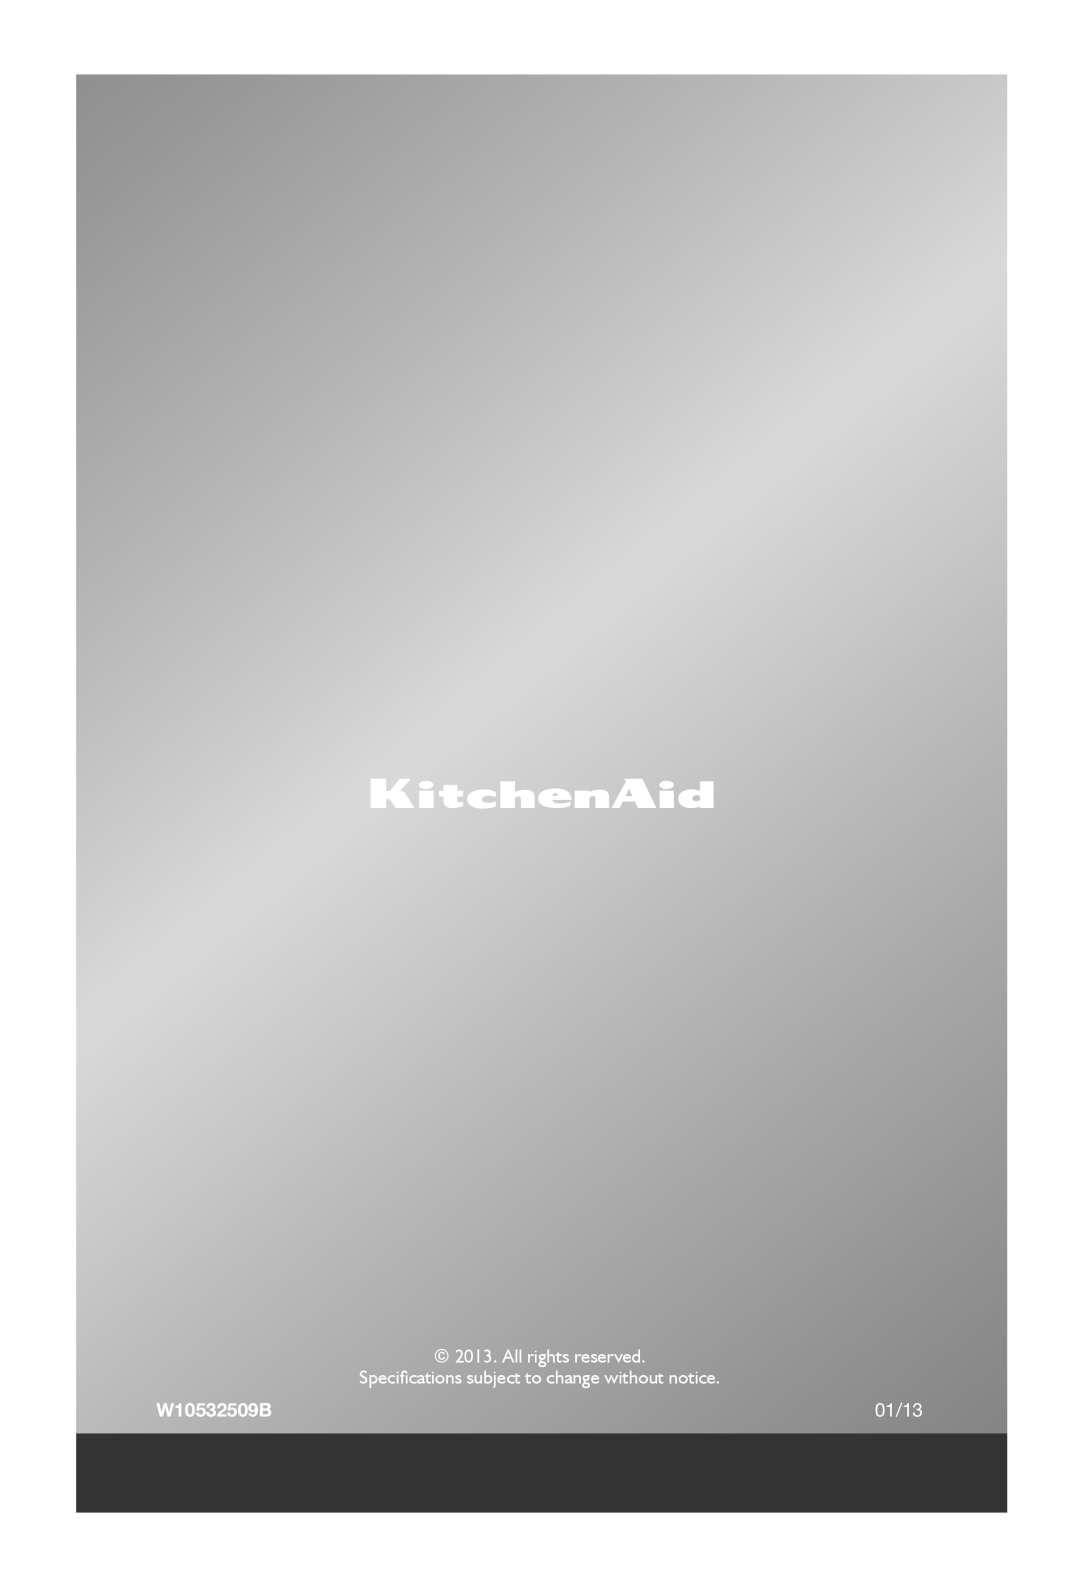 KitchenAid 5KHB3583 manual W10532509B, 01/13, All rights reserved, Specifications subject to change without notice 